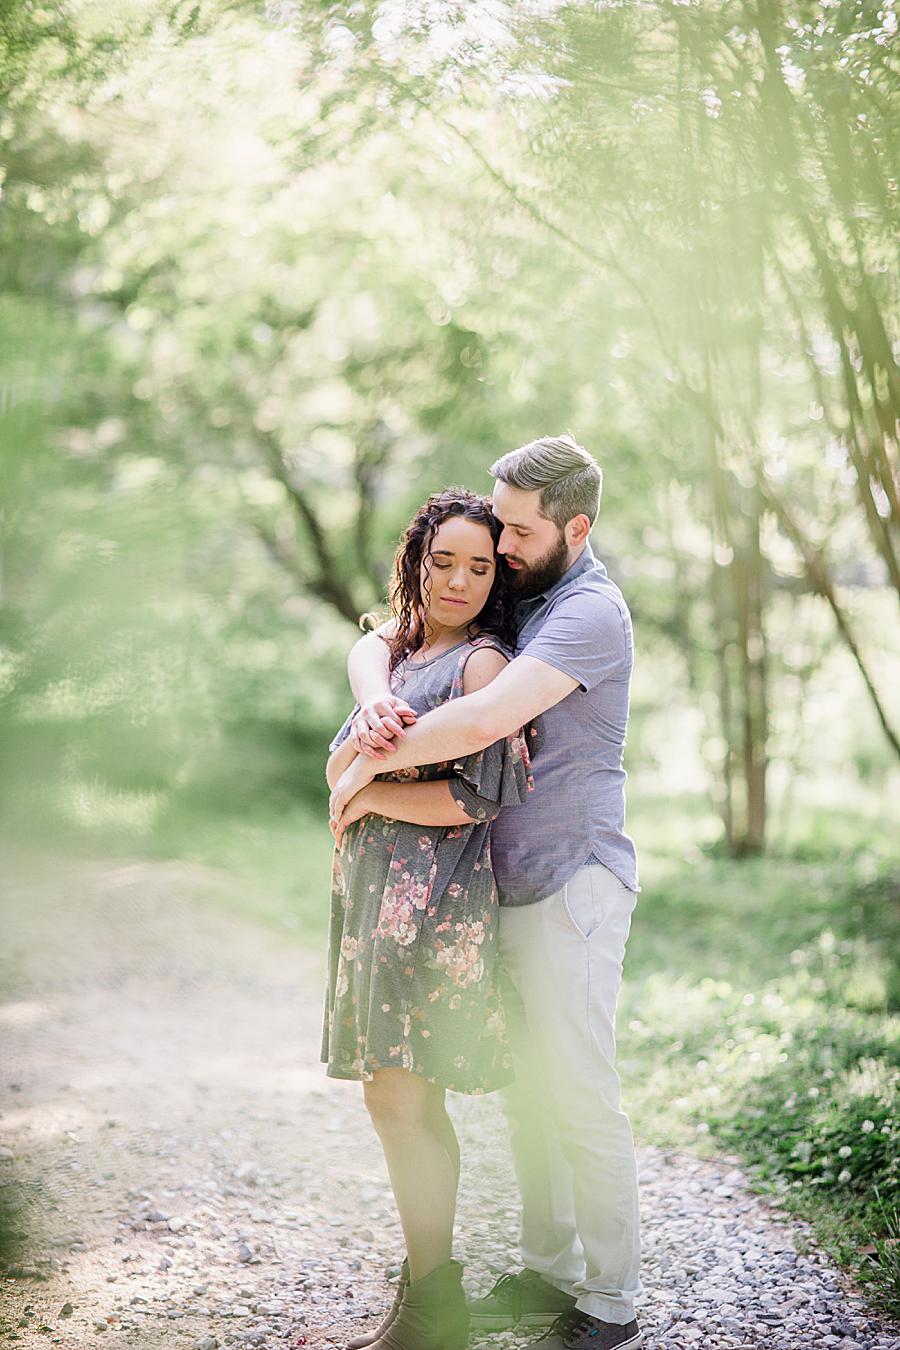 Floral dress at this 2018 favorite engagements by Knoxville Wedding Photographer, Amanda May Photos.